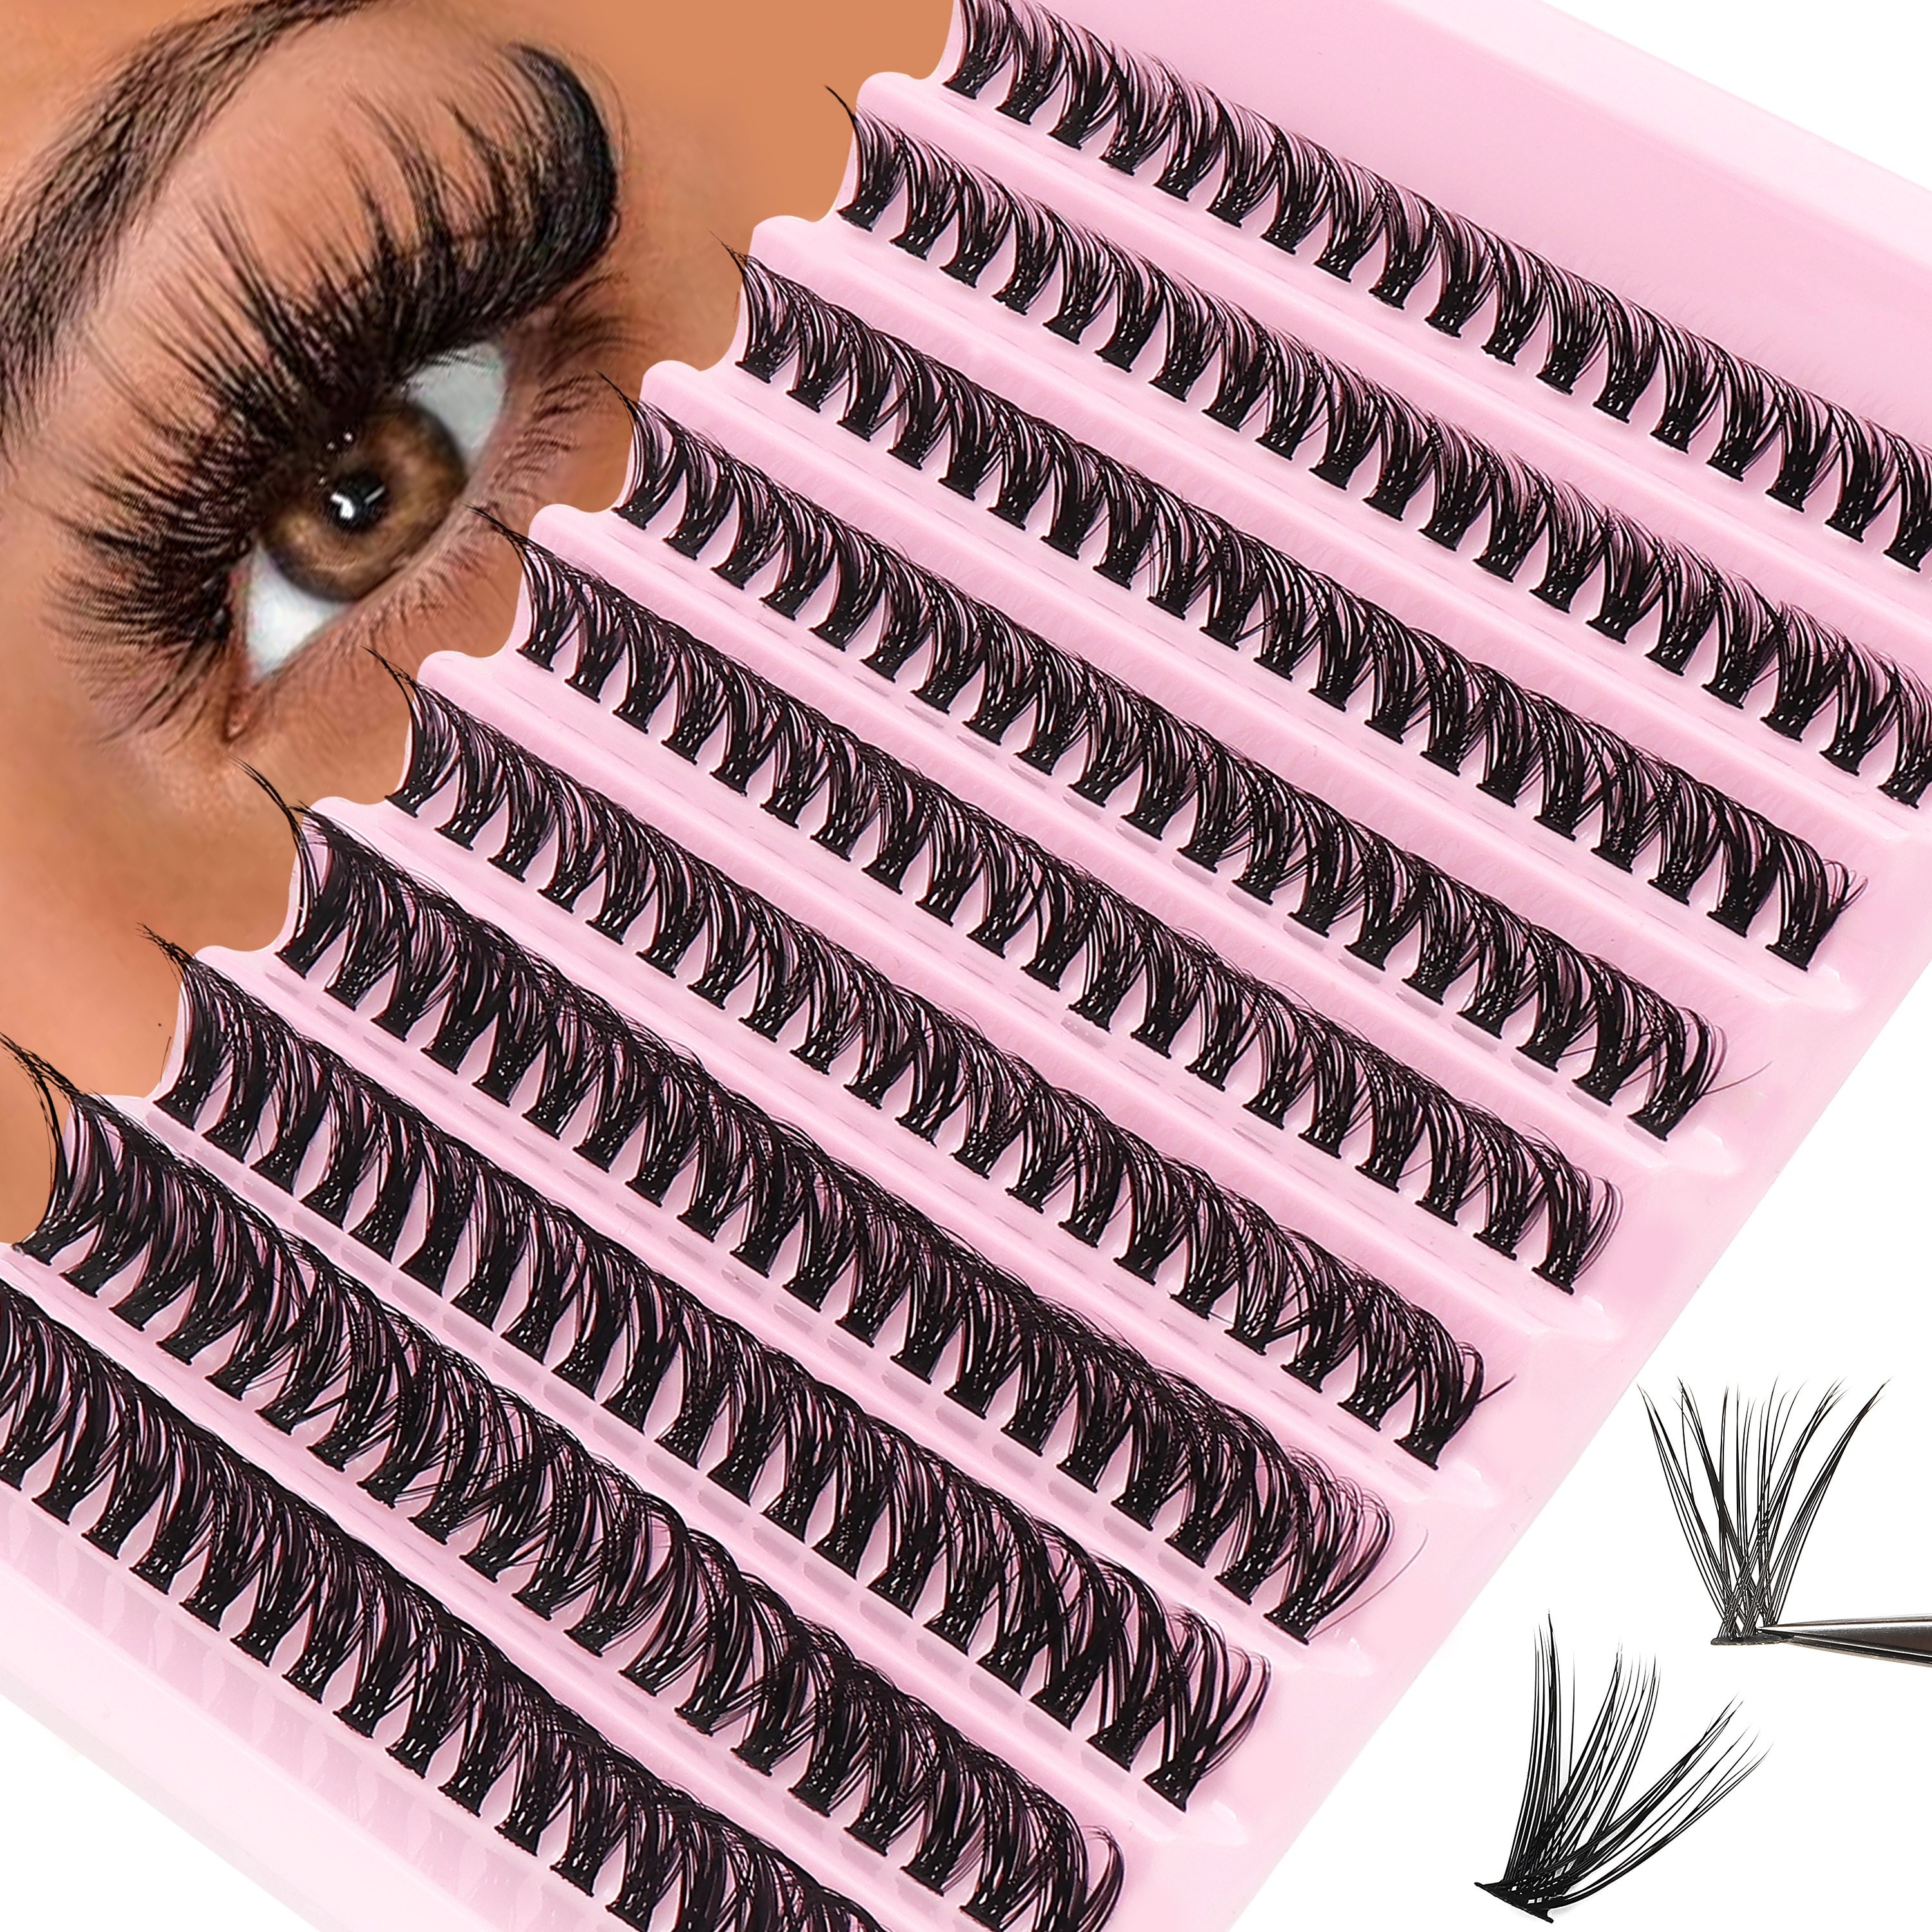 

Diy Eyelash Extensions Kit - 200pcs Natural Look D Lash Clusters, Fluffy & Thick Mix Styles For Beginners, Reusable, 0.05mm Thickness, Anime/dense/mixed/natural Style, Lengths 10-18mm